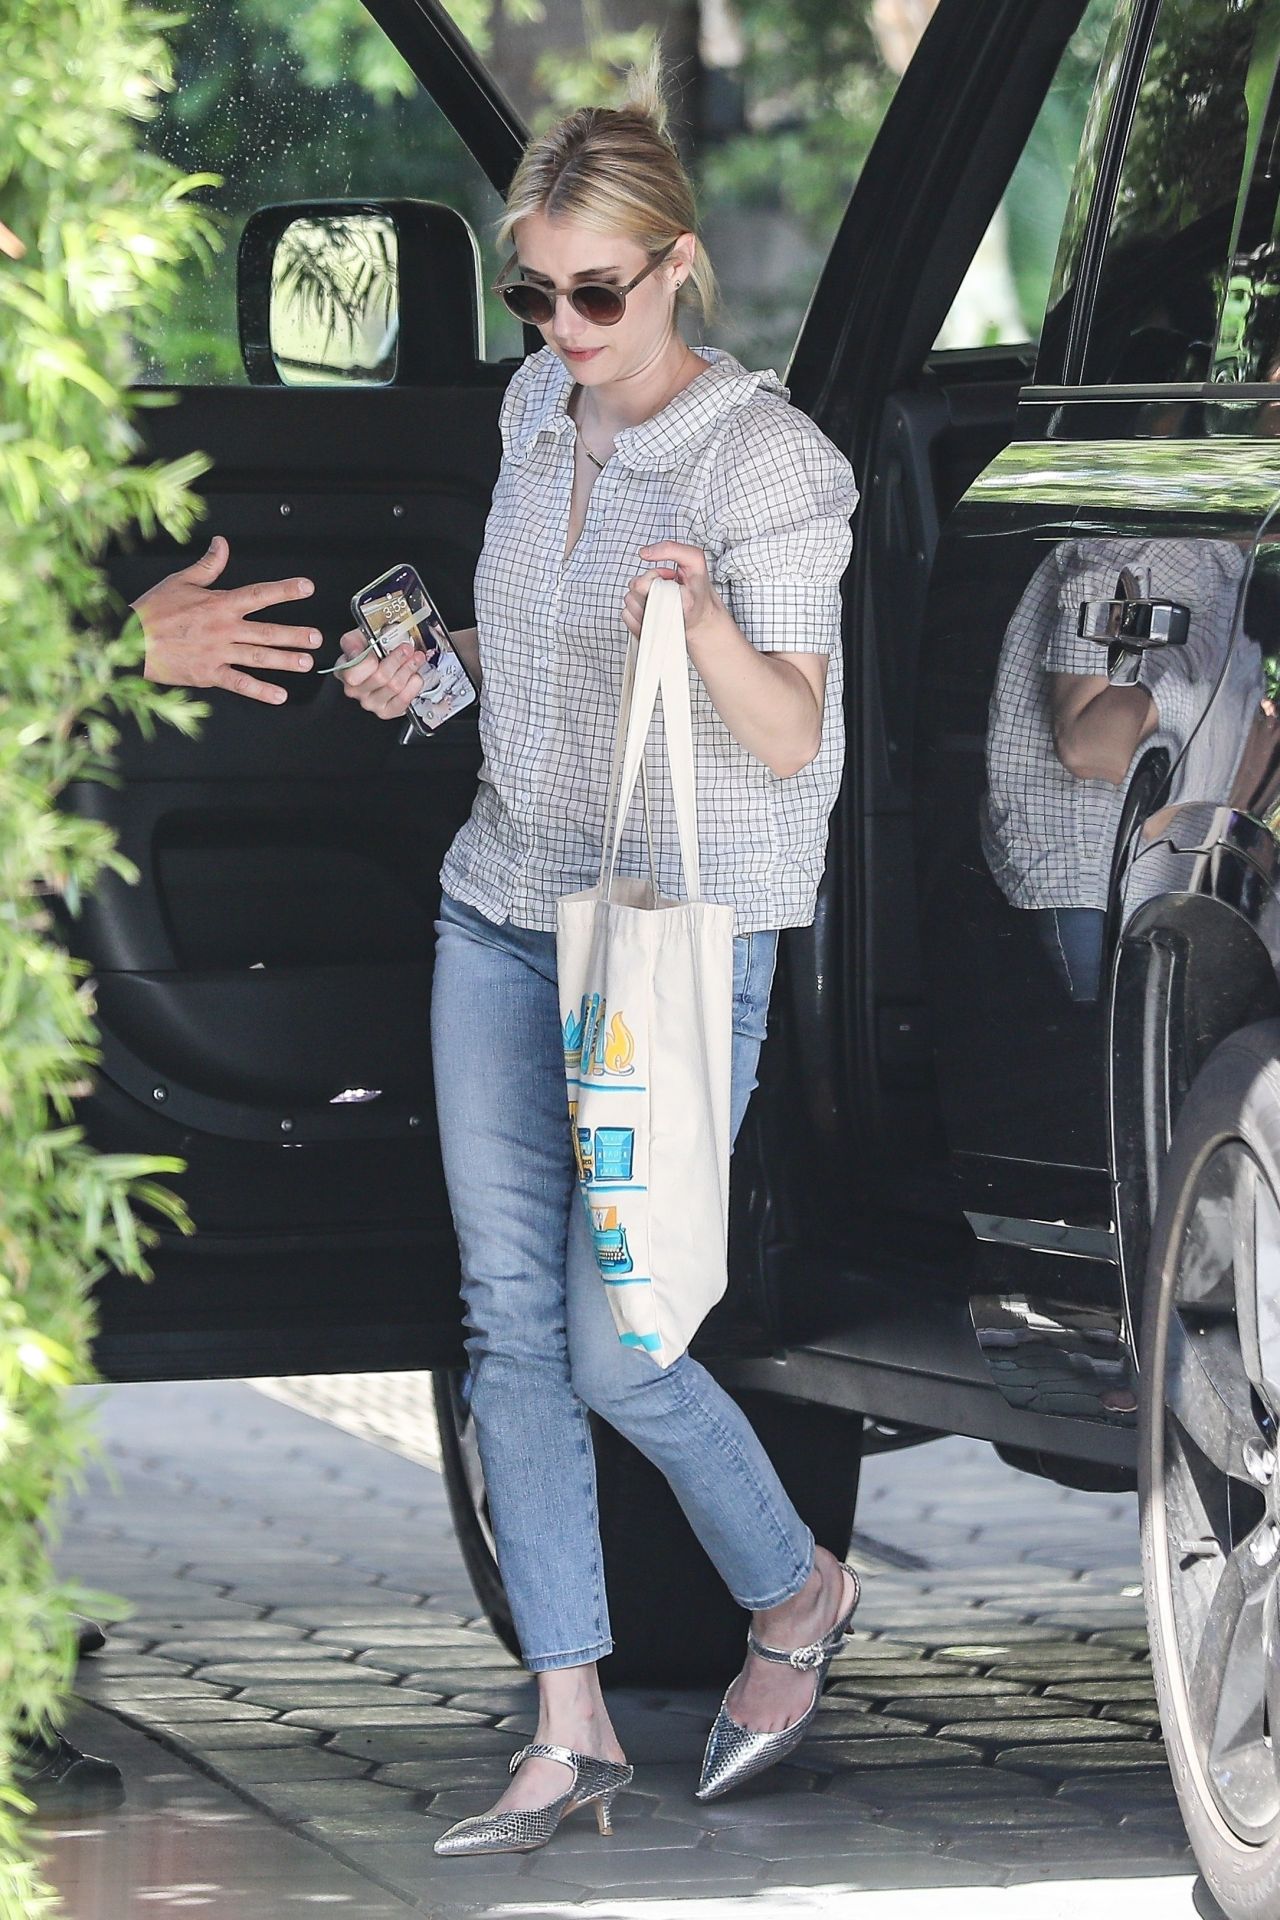 Emma Roberts West Hollywood May 29, 2021 – Star Style